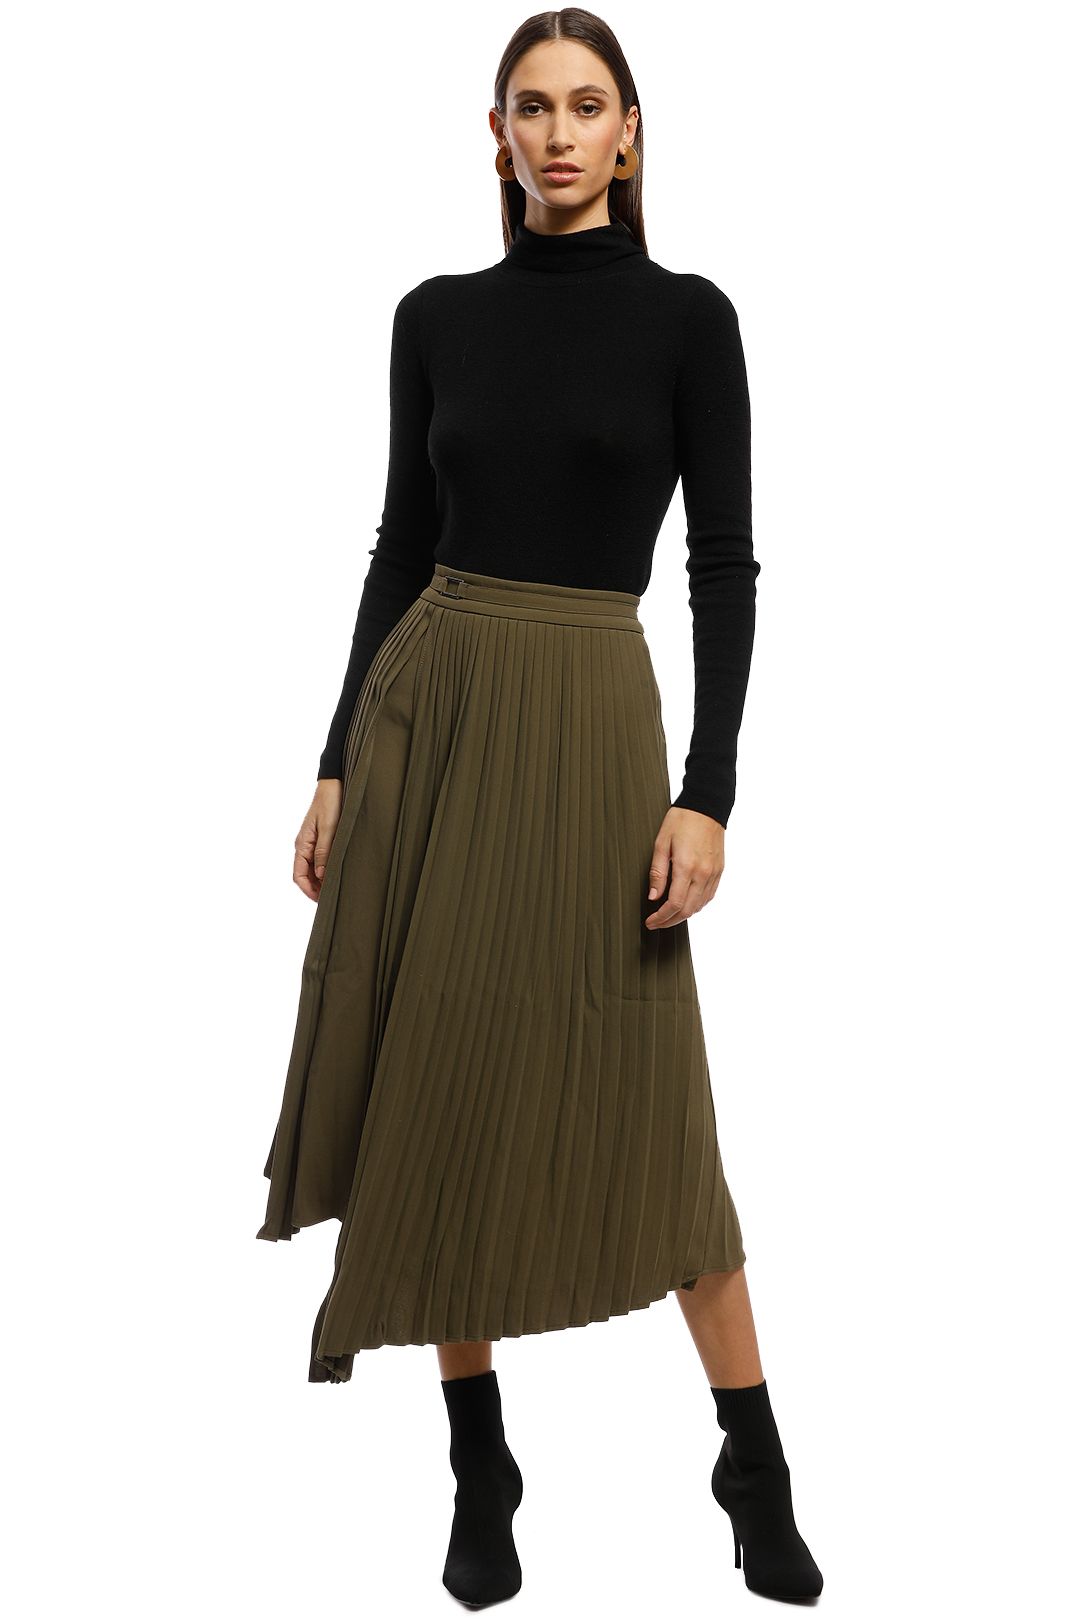 Friend of Audrey - Nathalie Pleated Asymmetry Skirt - Olive - Front